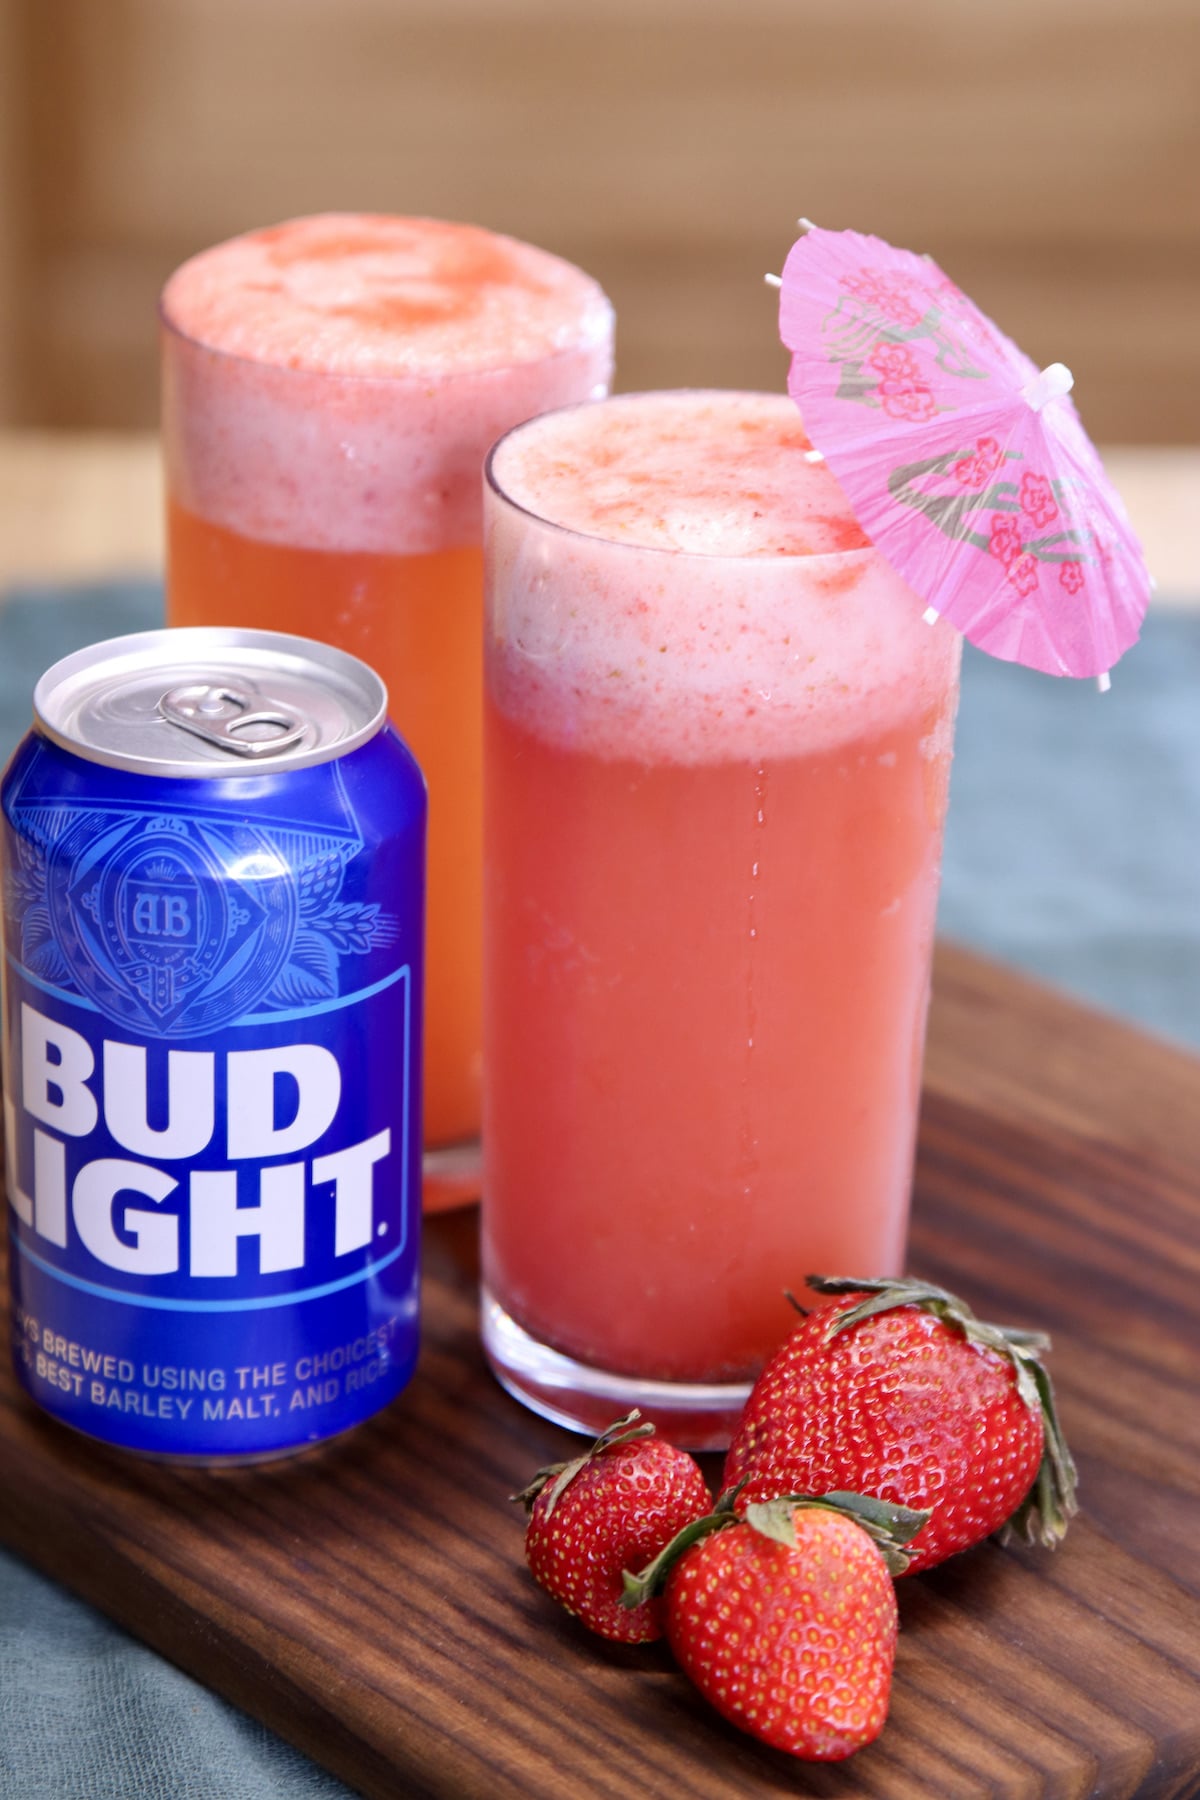 bud light beer with 2 glasses of strawberry shandy cocktails.